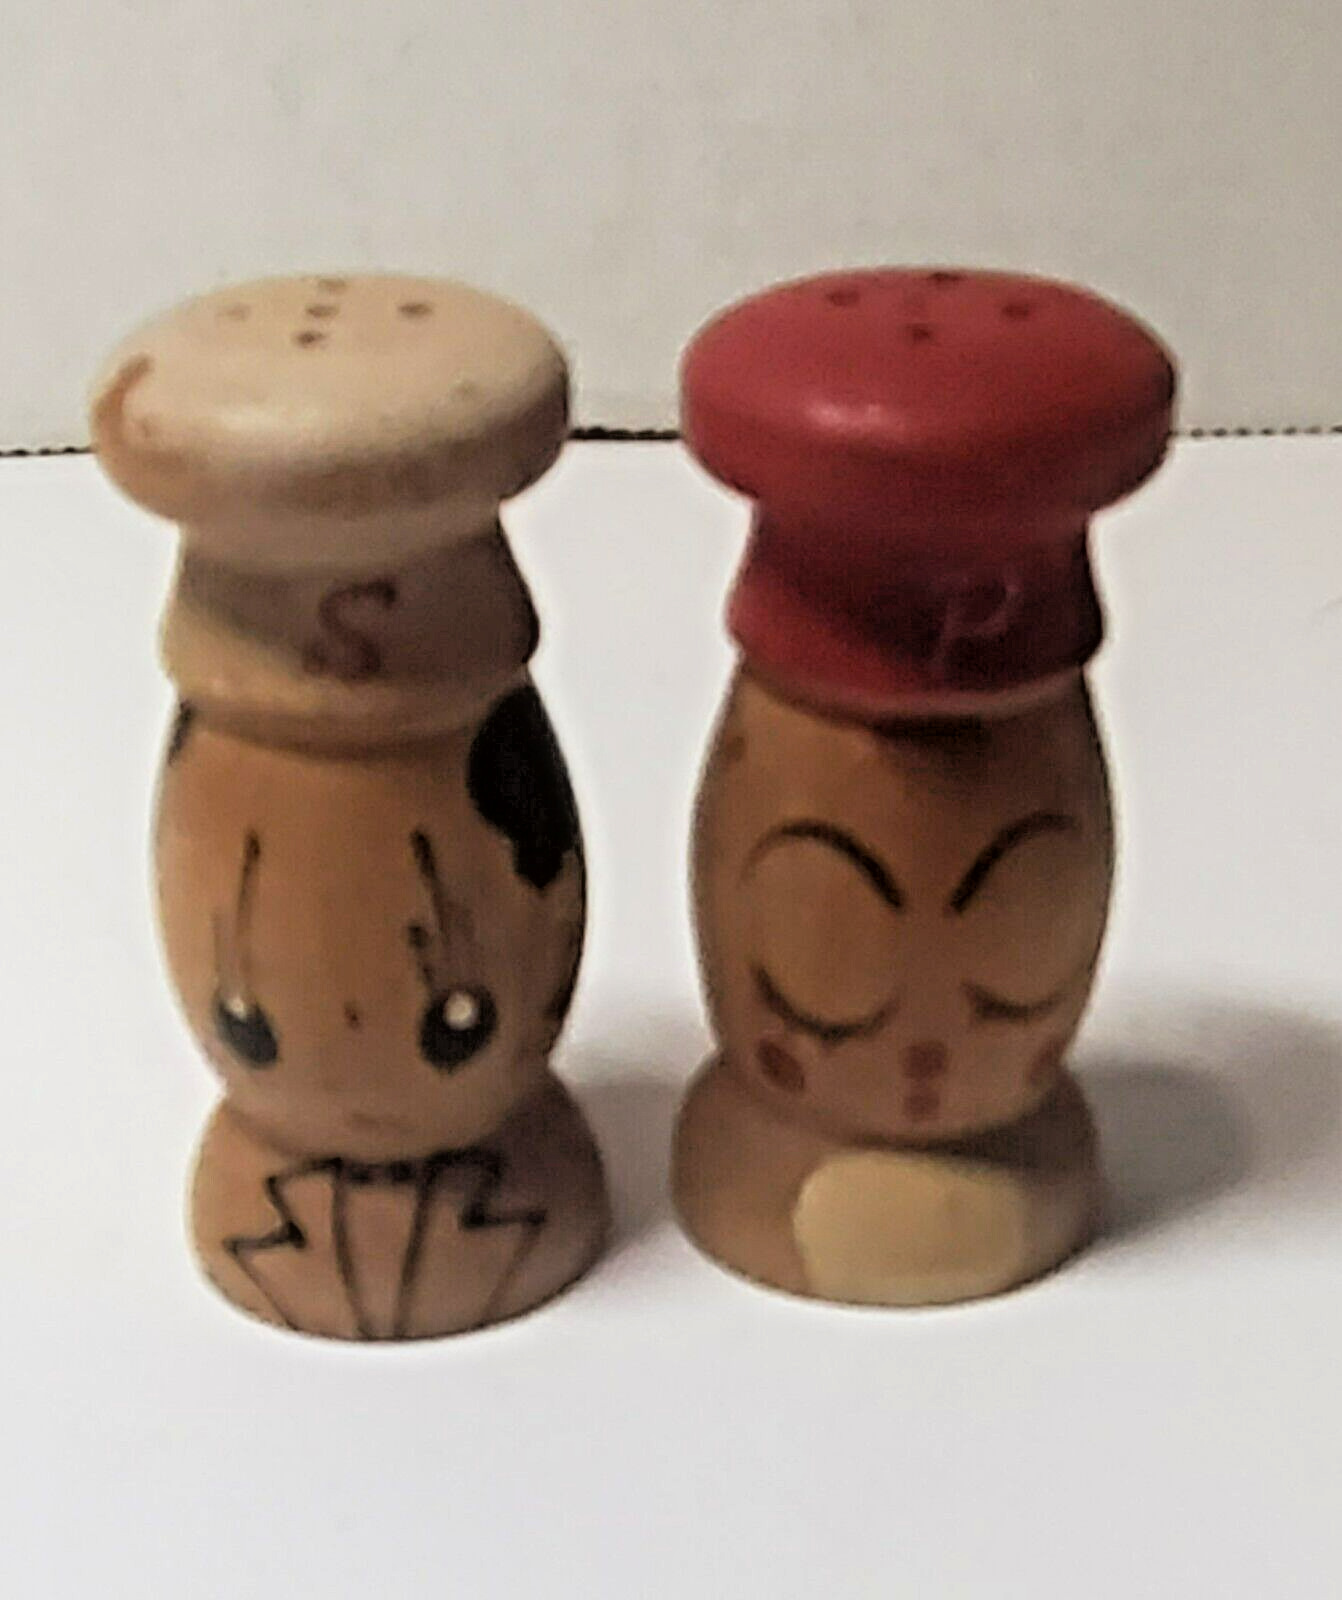 Vintage hand painted man and woman MCM Wooden Salt & Pepper Shakers Japan KItsch